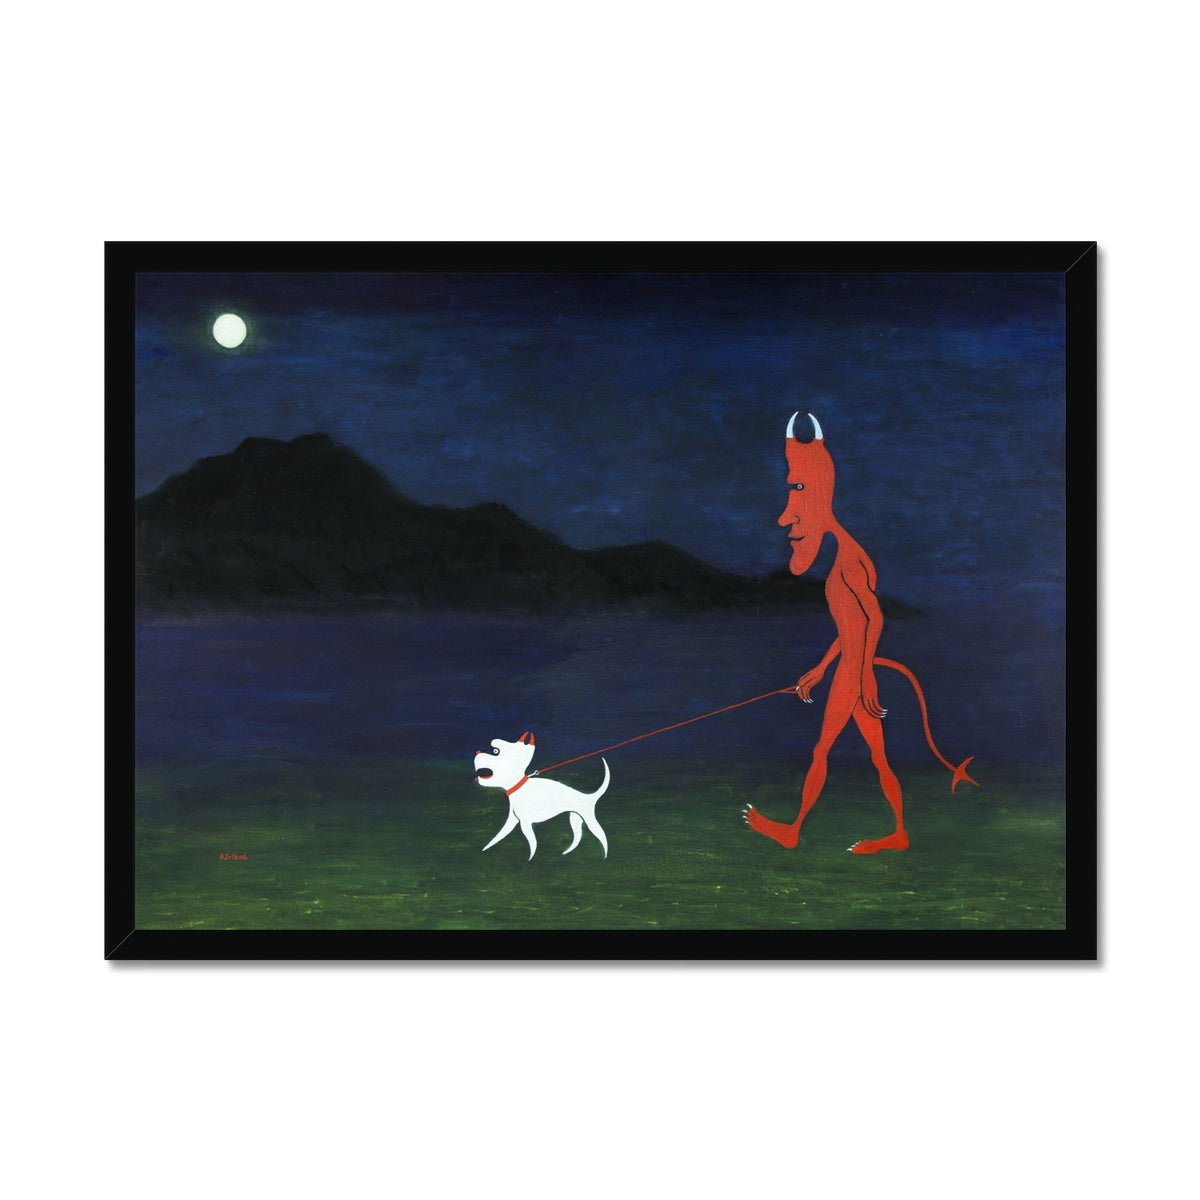 The Devil and his dog, out for an evening walk Framed Print